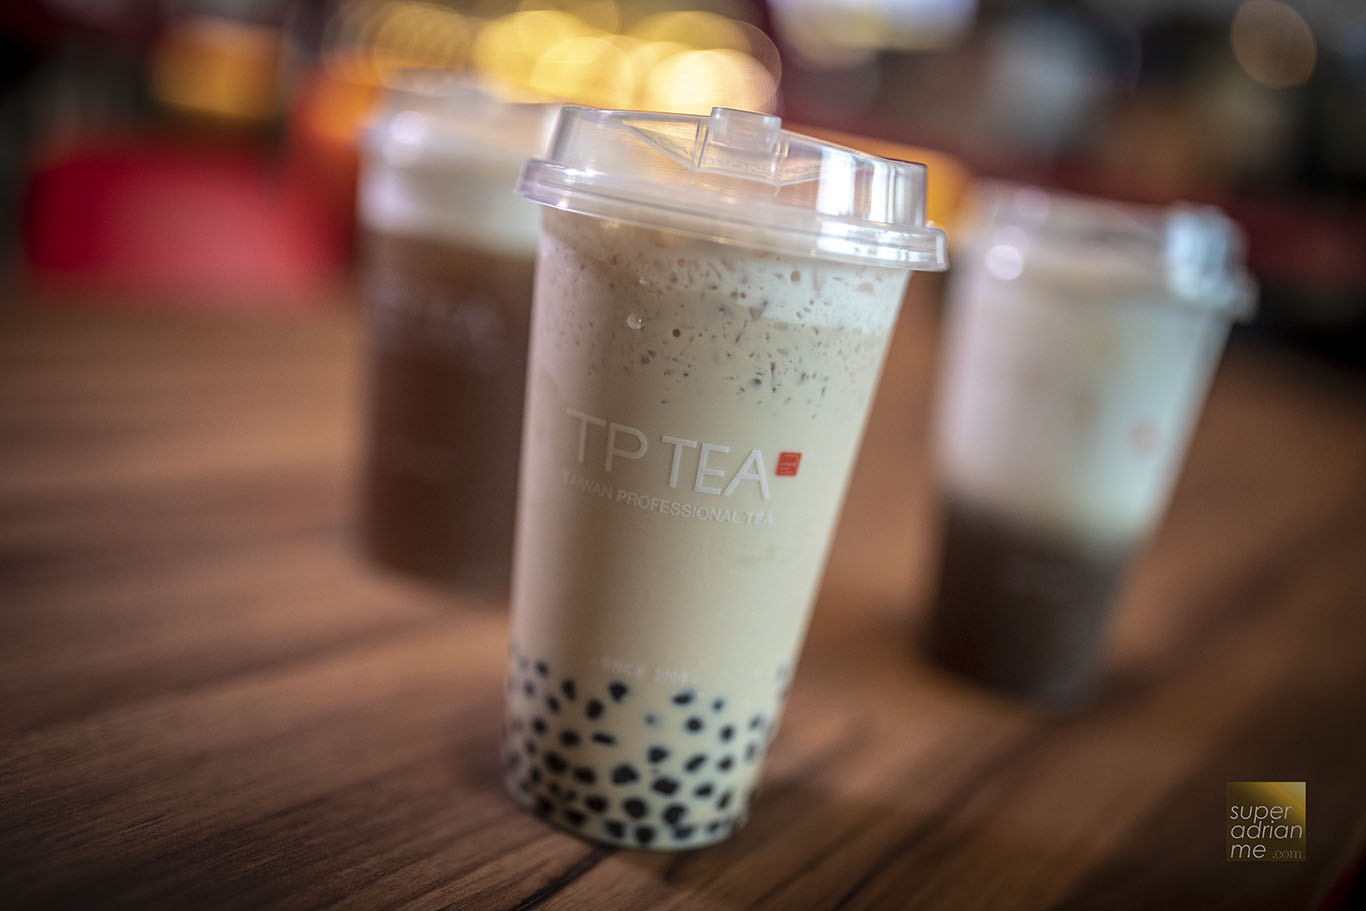 TP TEA opens first outlet at Changi Airport T2 on 27 June 2018